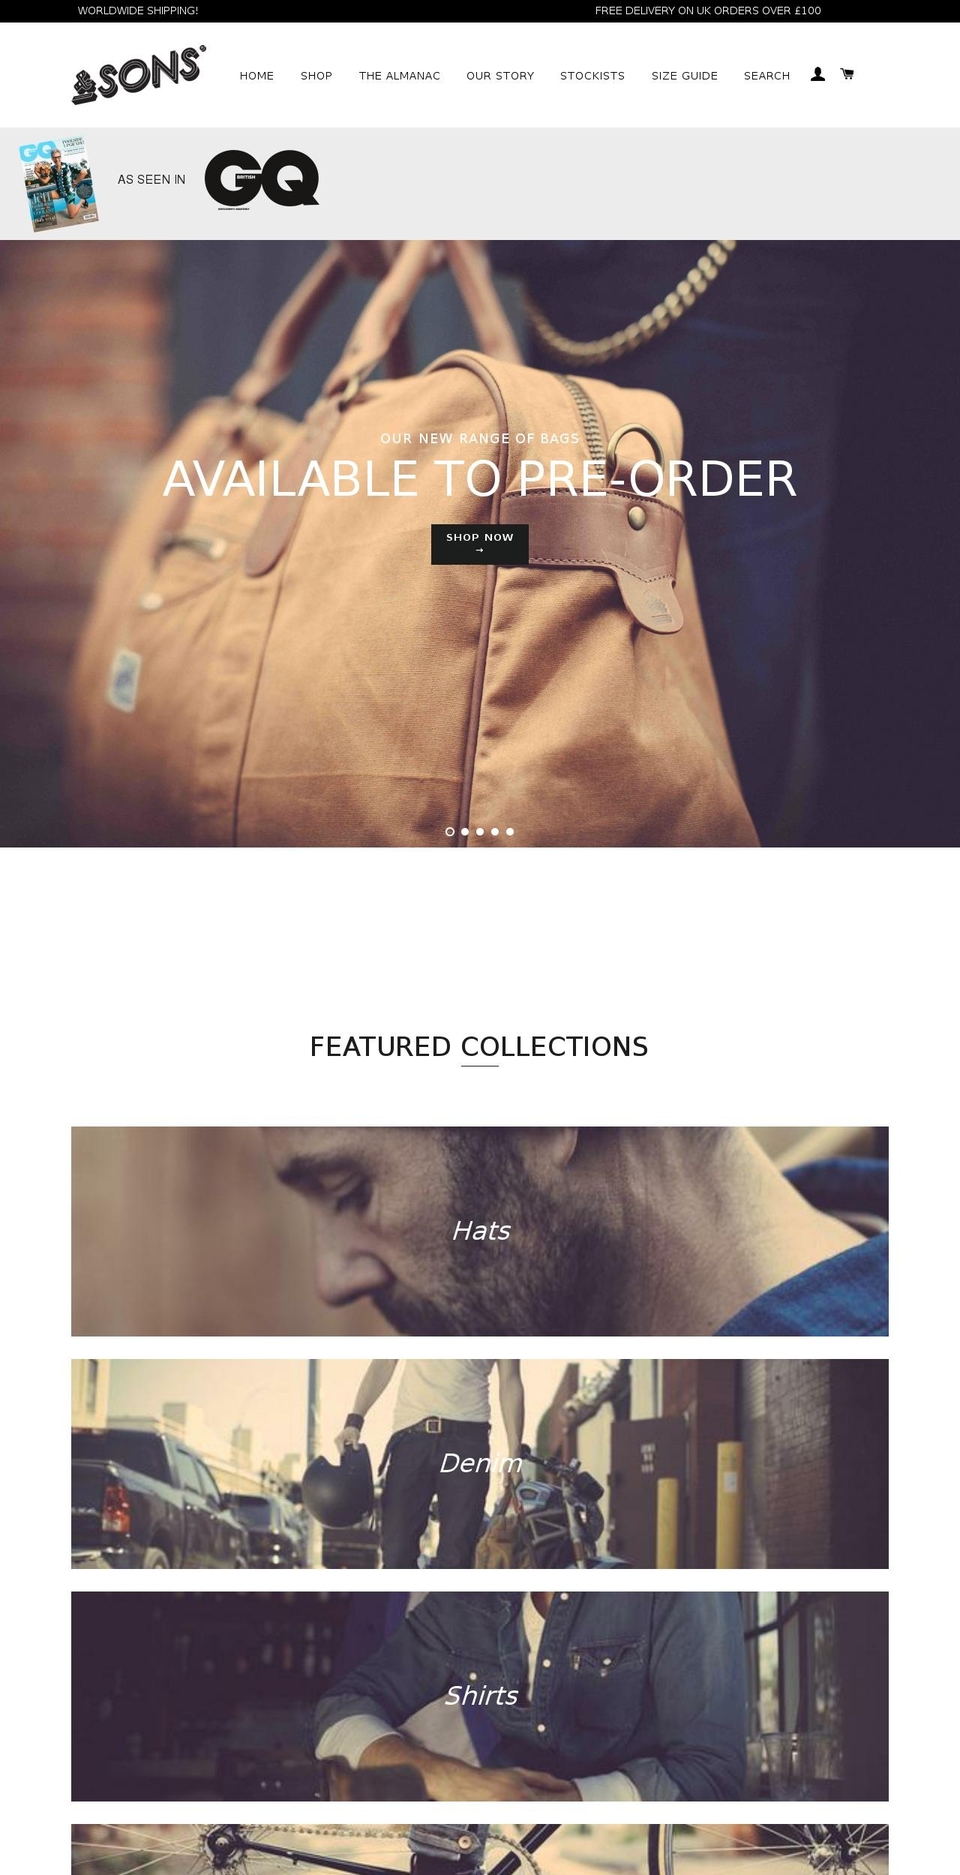 EVA Shopify theme site example andsons.co.uk